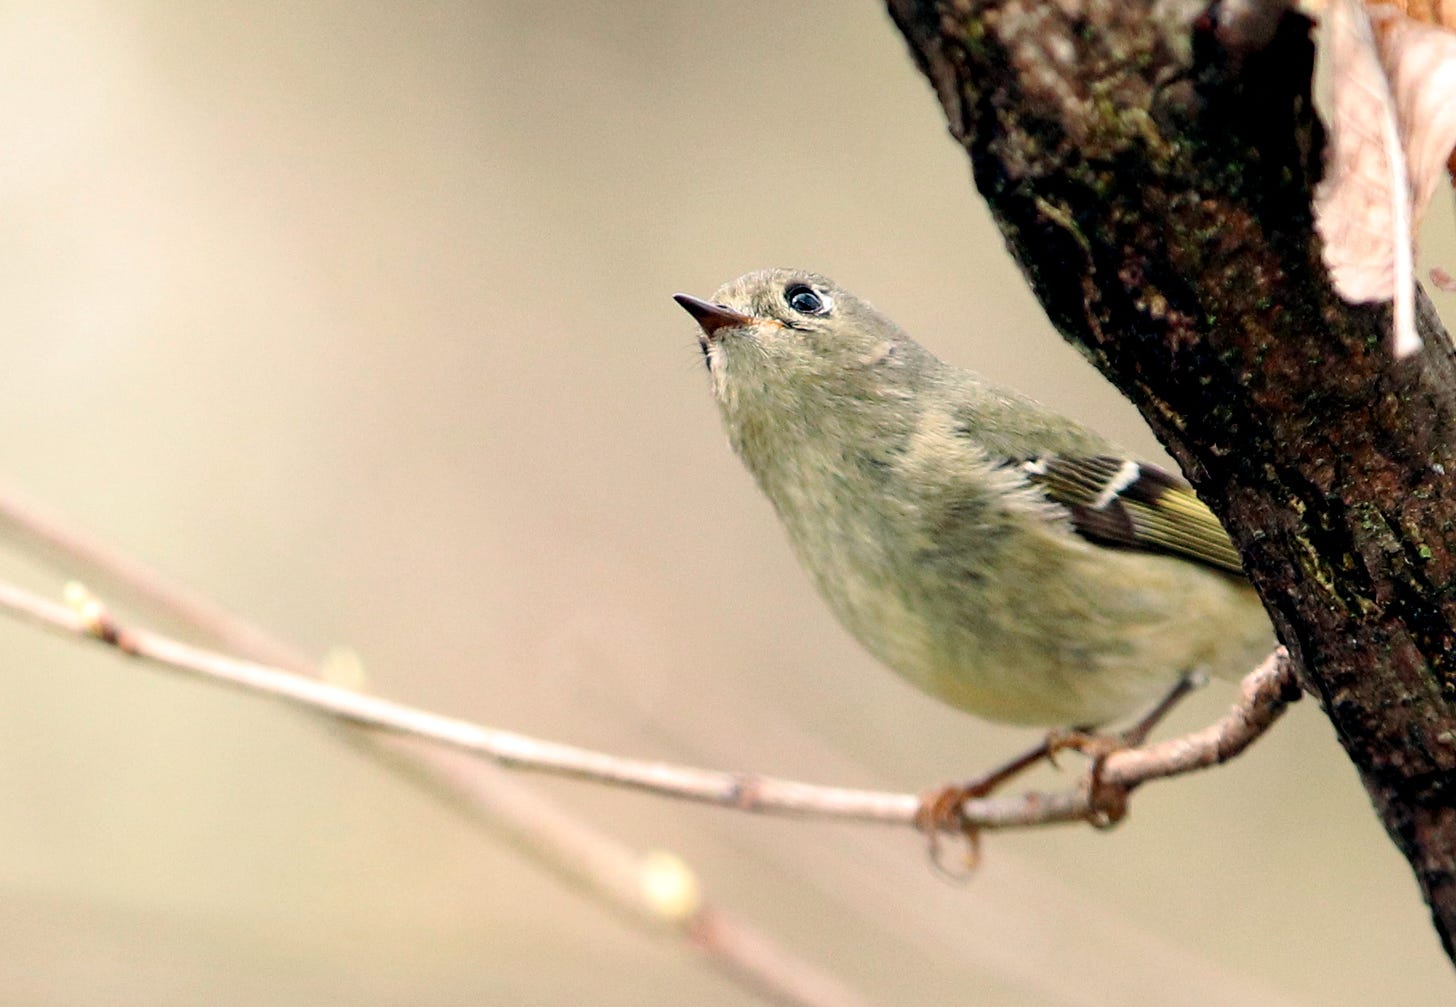 Close-up of a small bird perched on a branch and gazing up and away from the camera. It has a small pointed beak, black eye, and an olive-colored body with dark stripes on its wing.